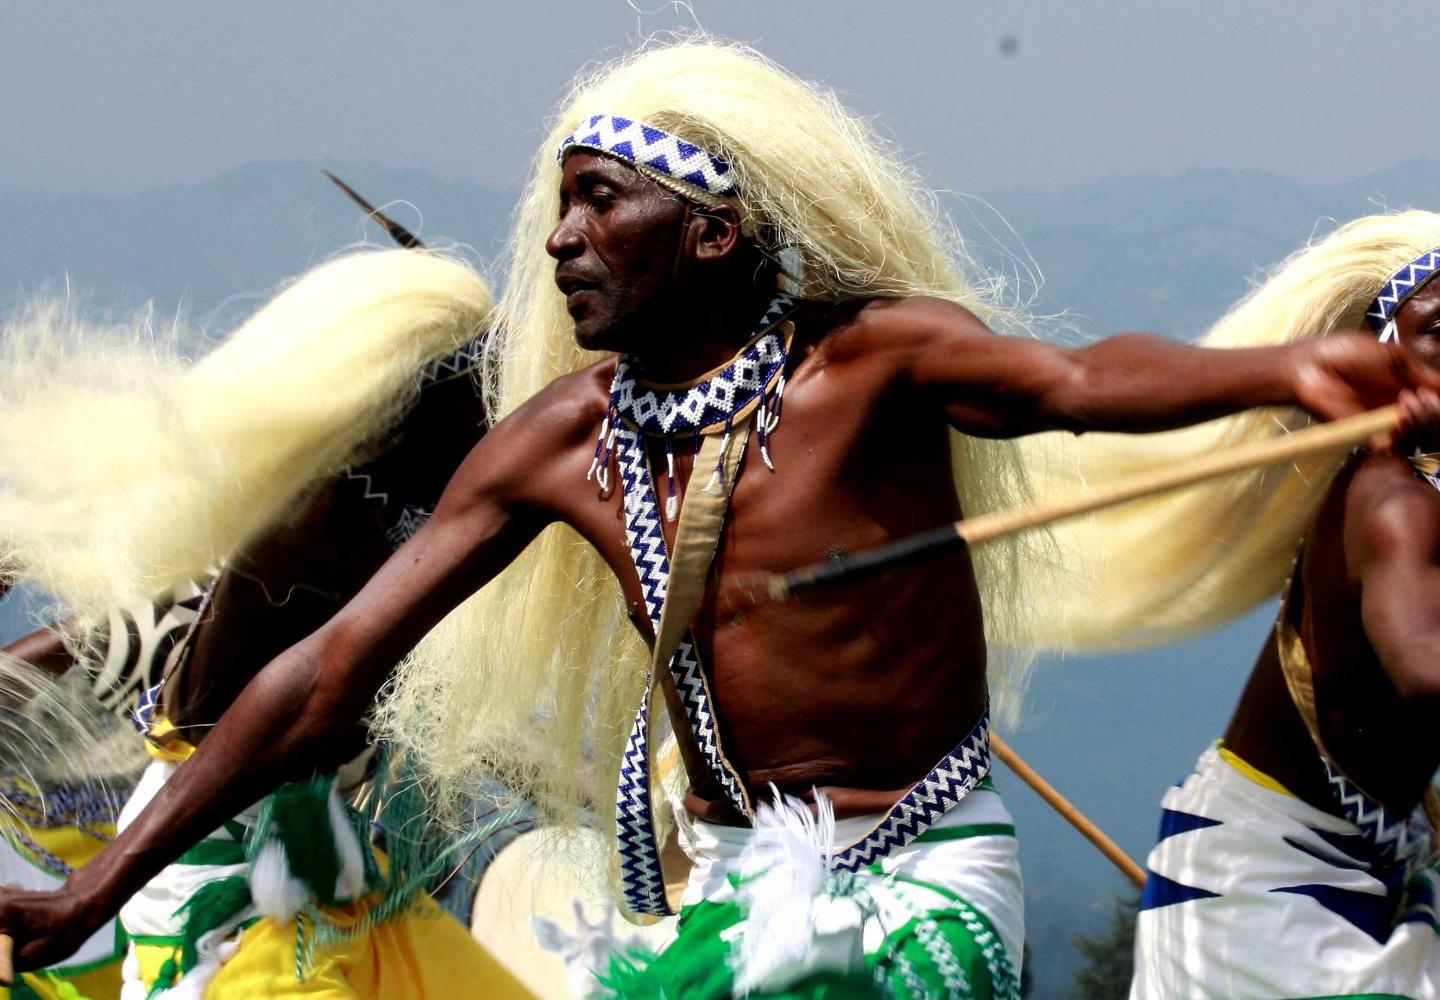 Performance Intore dancers with spear and traditional outfit (Rwanda)